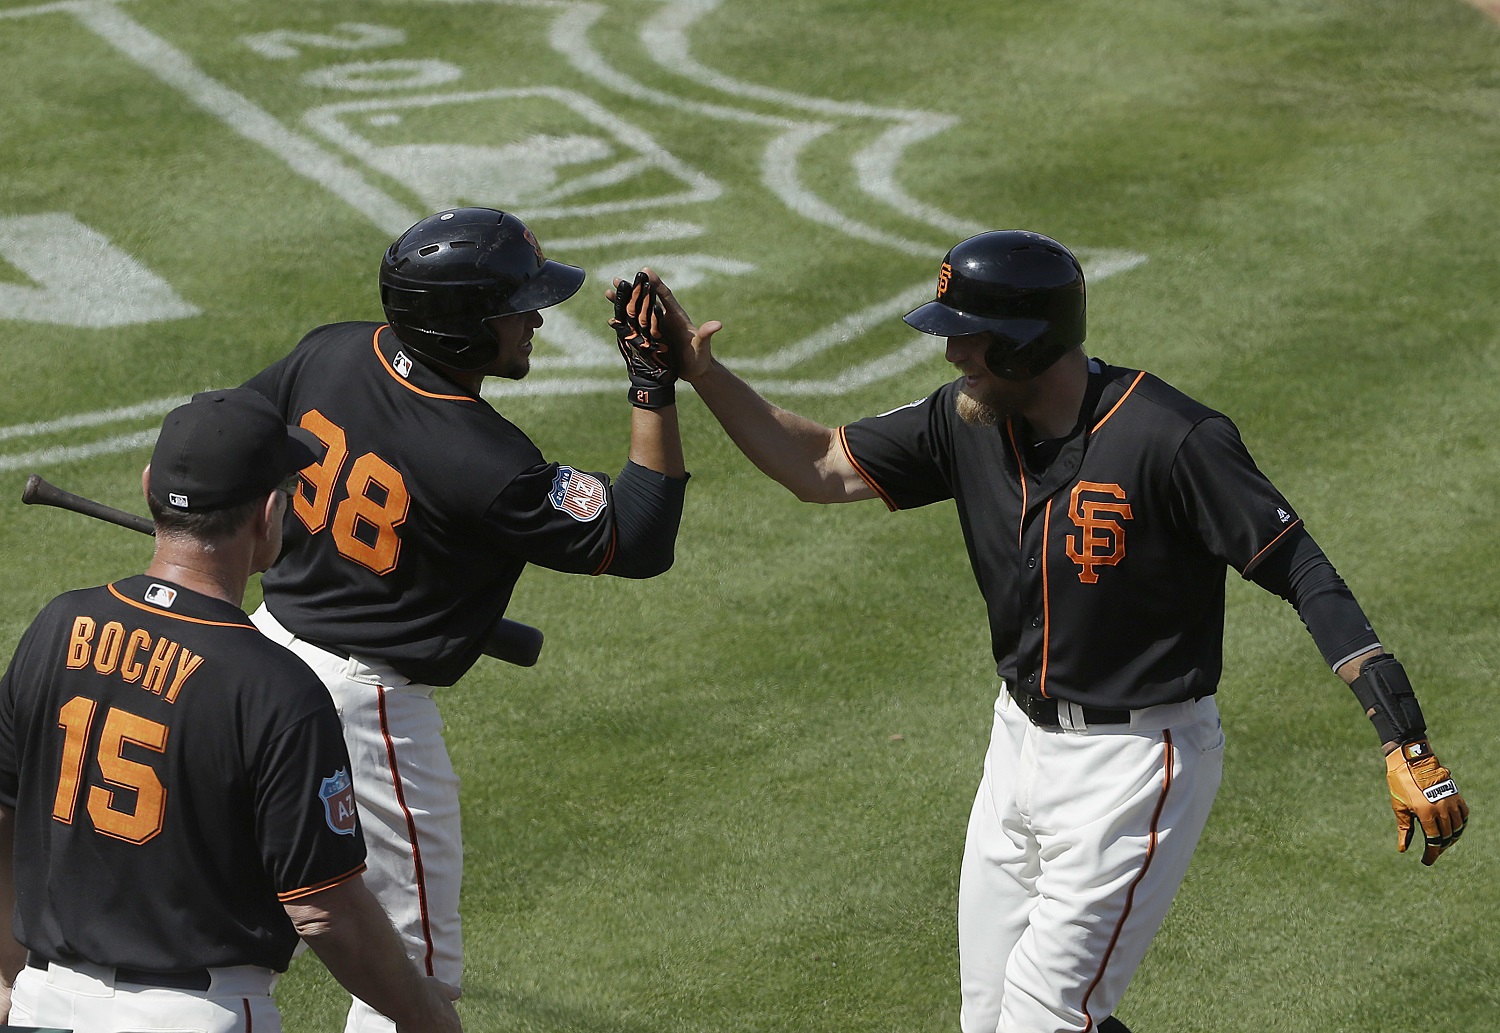 San Francisco Giants' Hunter Pence, right, celebrates with Miguel Olivo (98) and manager Bruce Bochy (15) after hitting a home run against the Oakland Athletics during the fourth inning of a spring training baseball game in Scottsdale, Ariz., Monday, March 21, 2016. (AP Photo/Jeff Chiu)